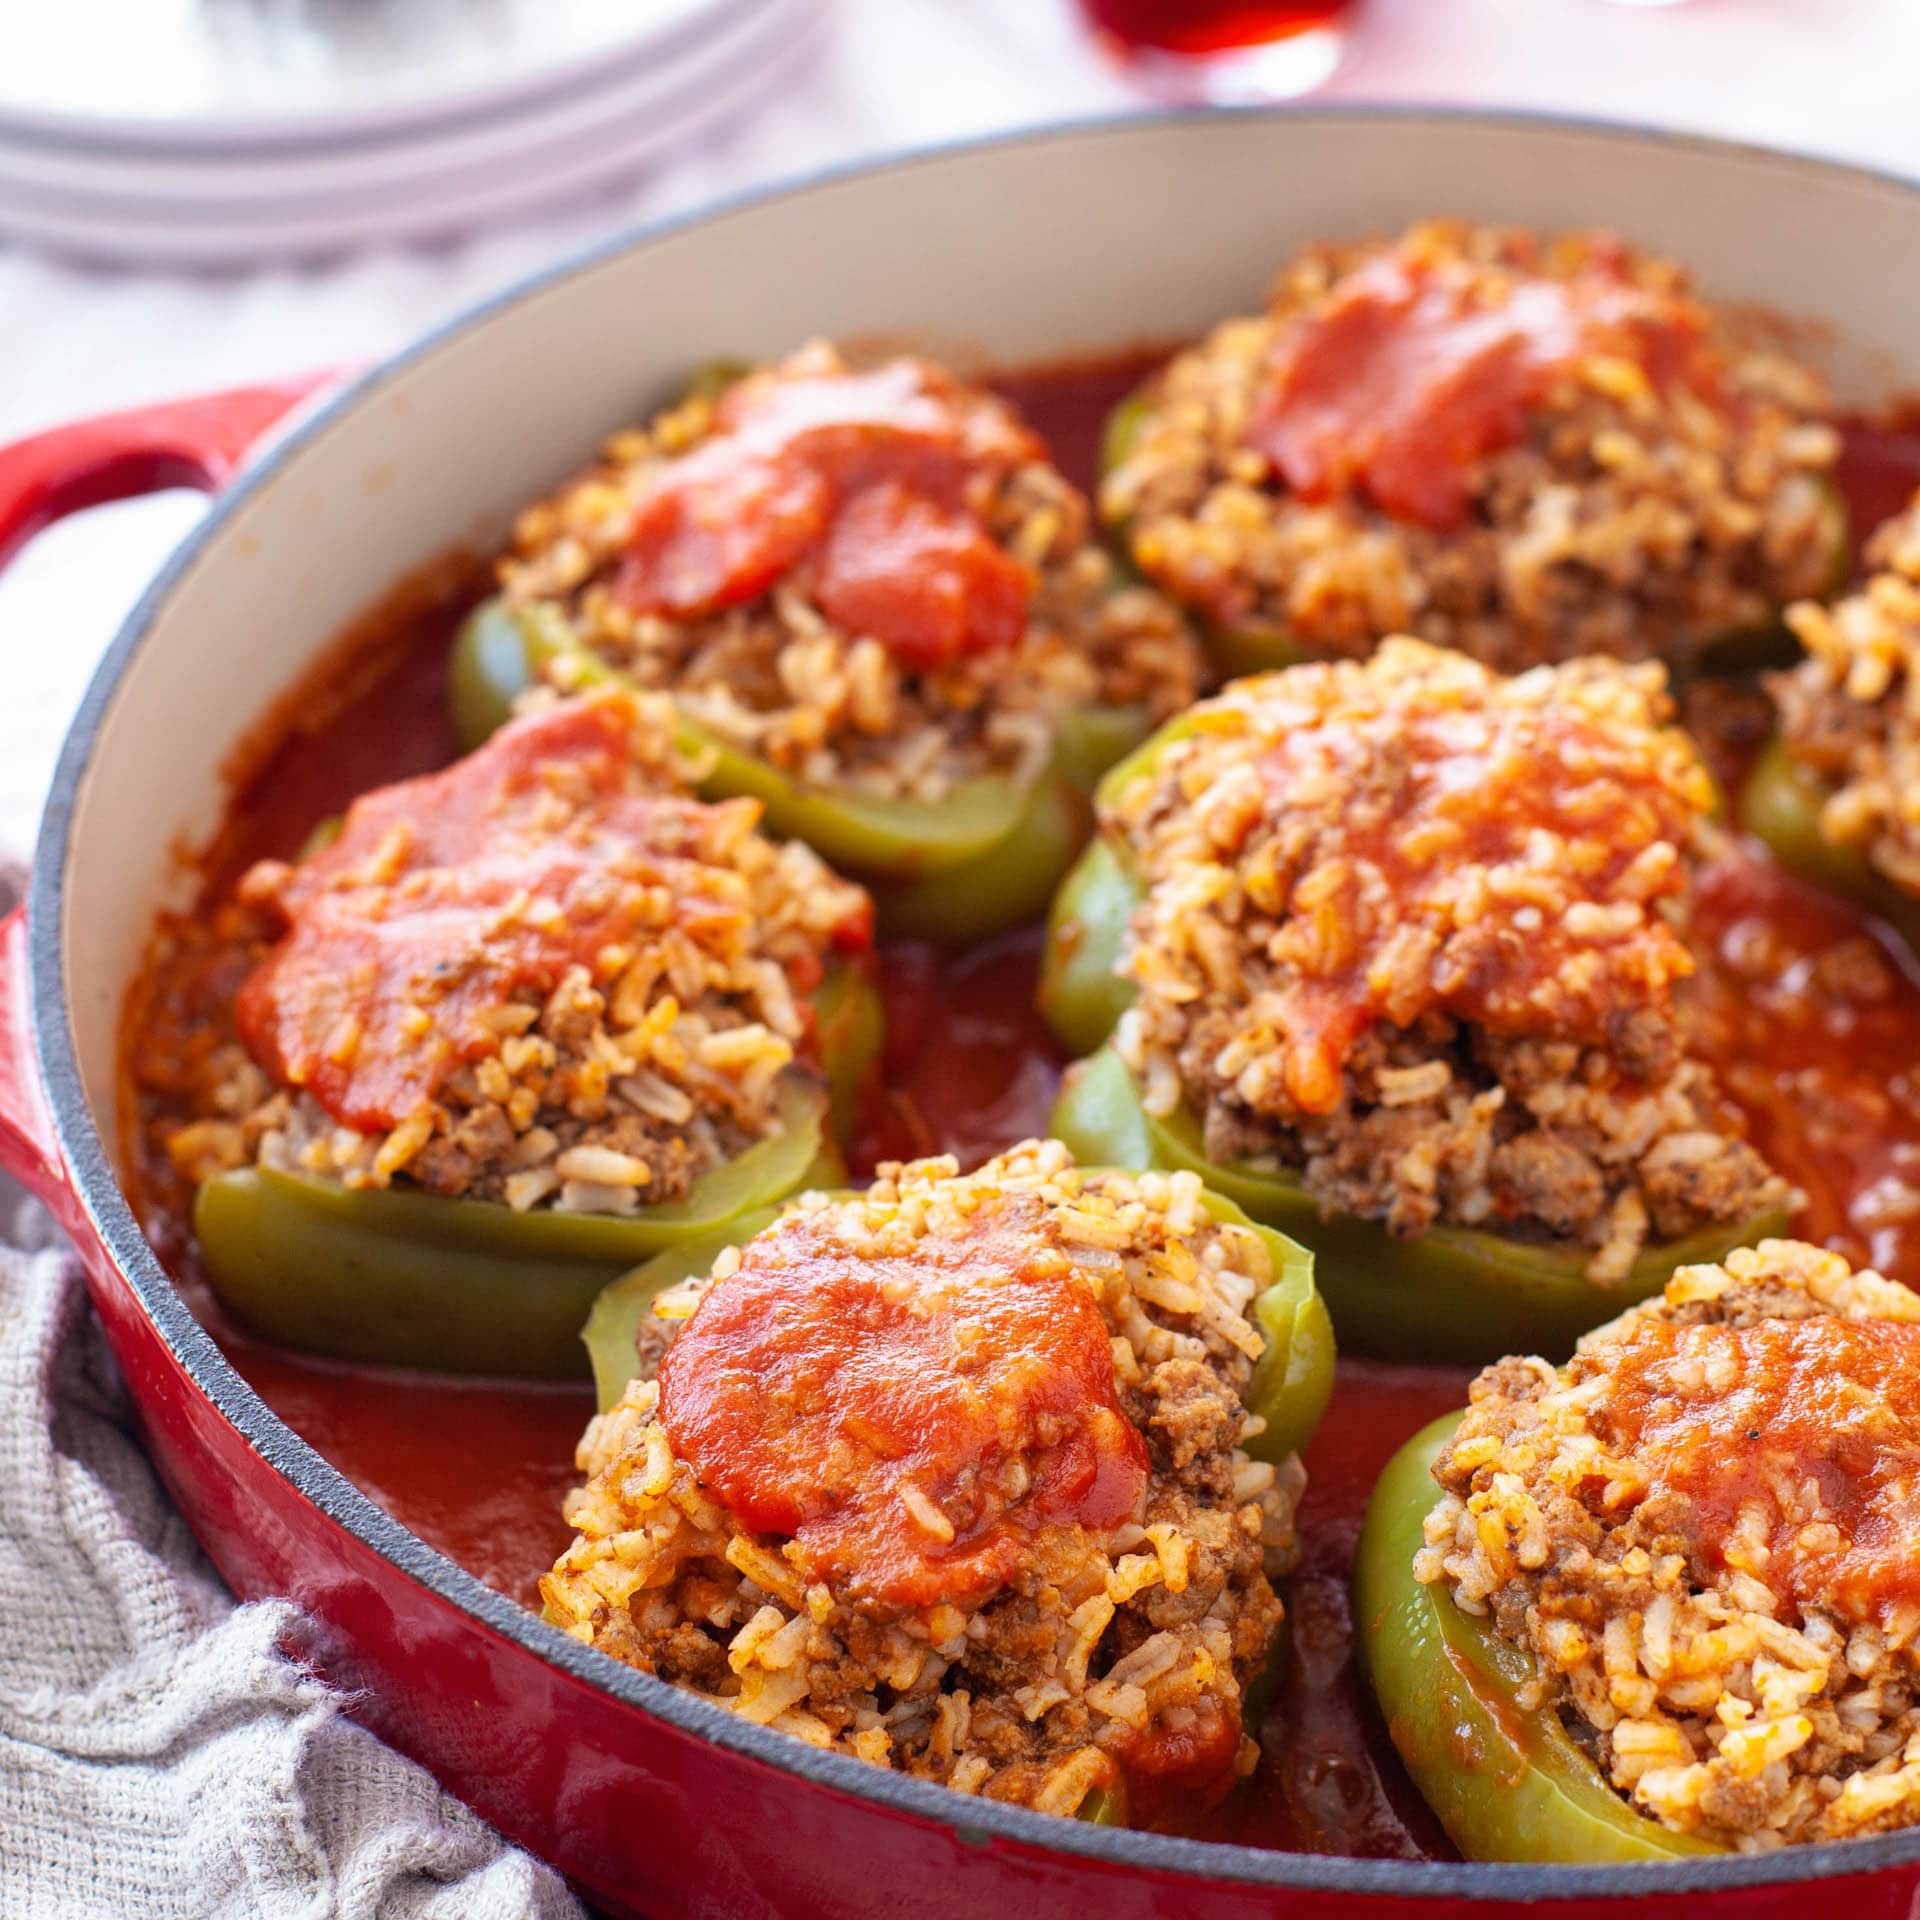 A shallow red Dutch oven filled with old fashioned stuffed bell peppers in a red sauce